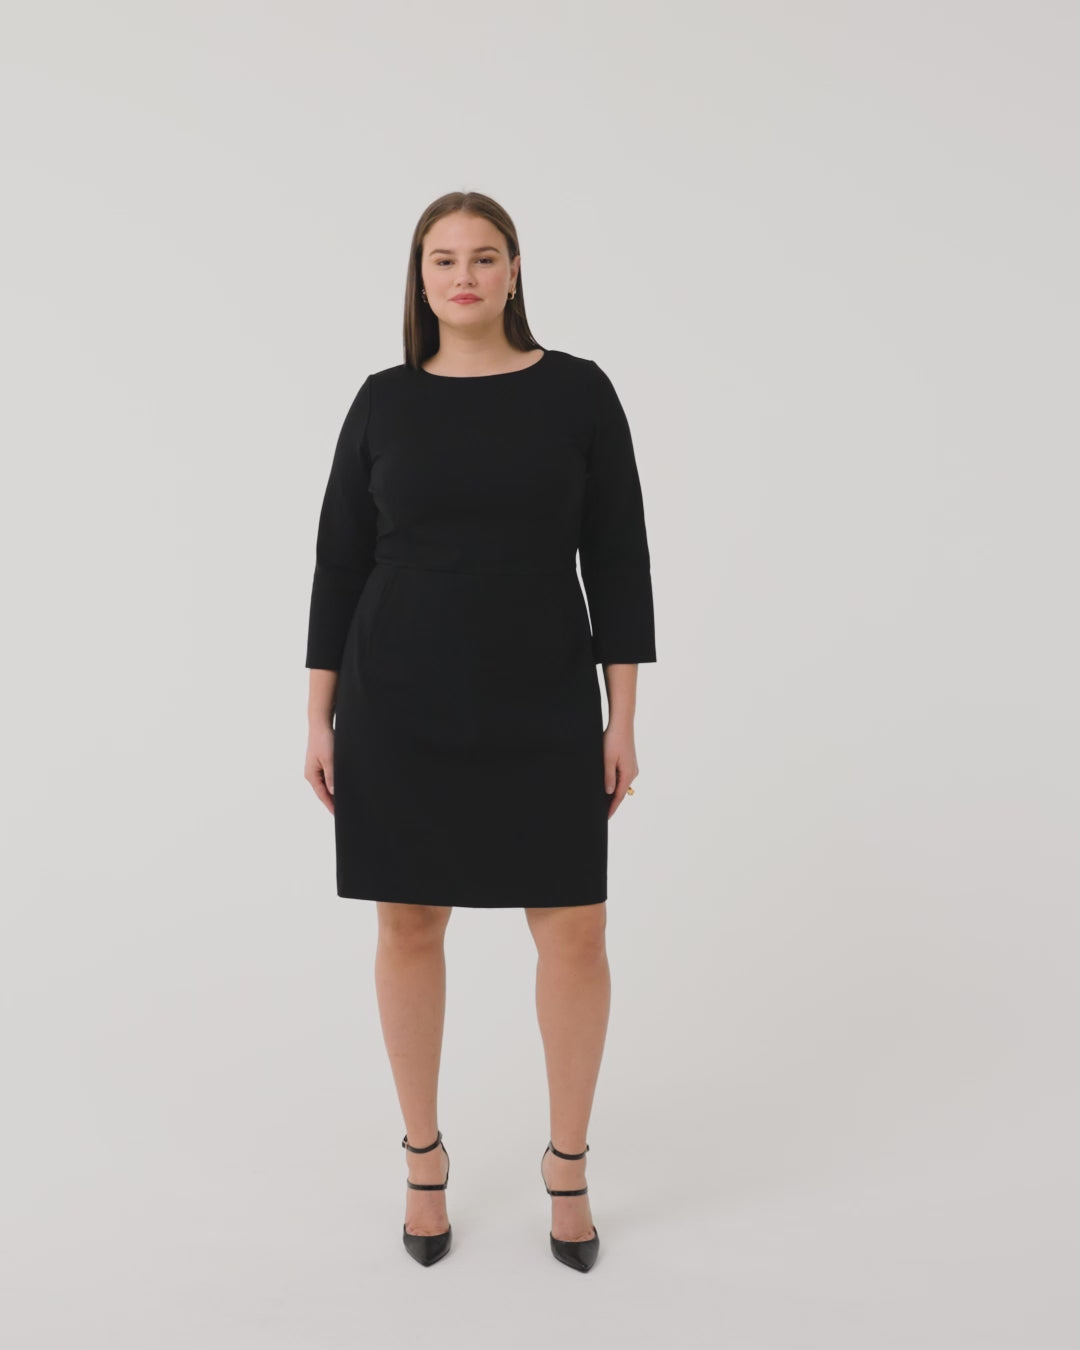 Spanx The Perfect A-line 3/4 Sleeve Dress in Black